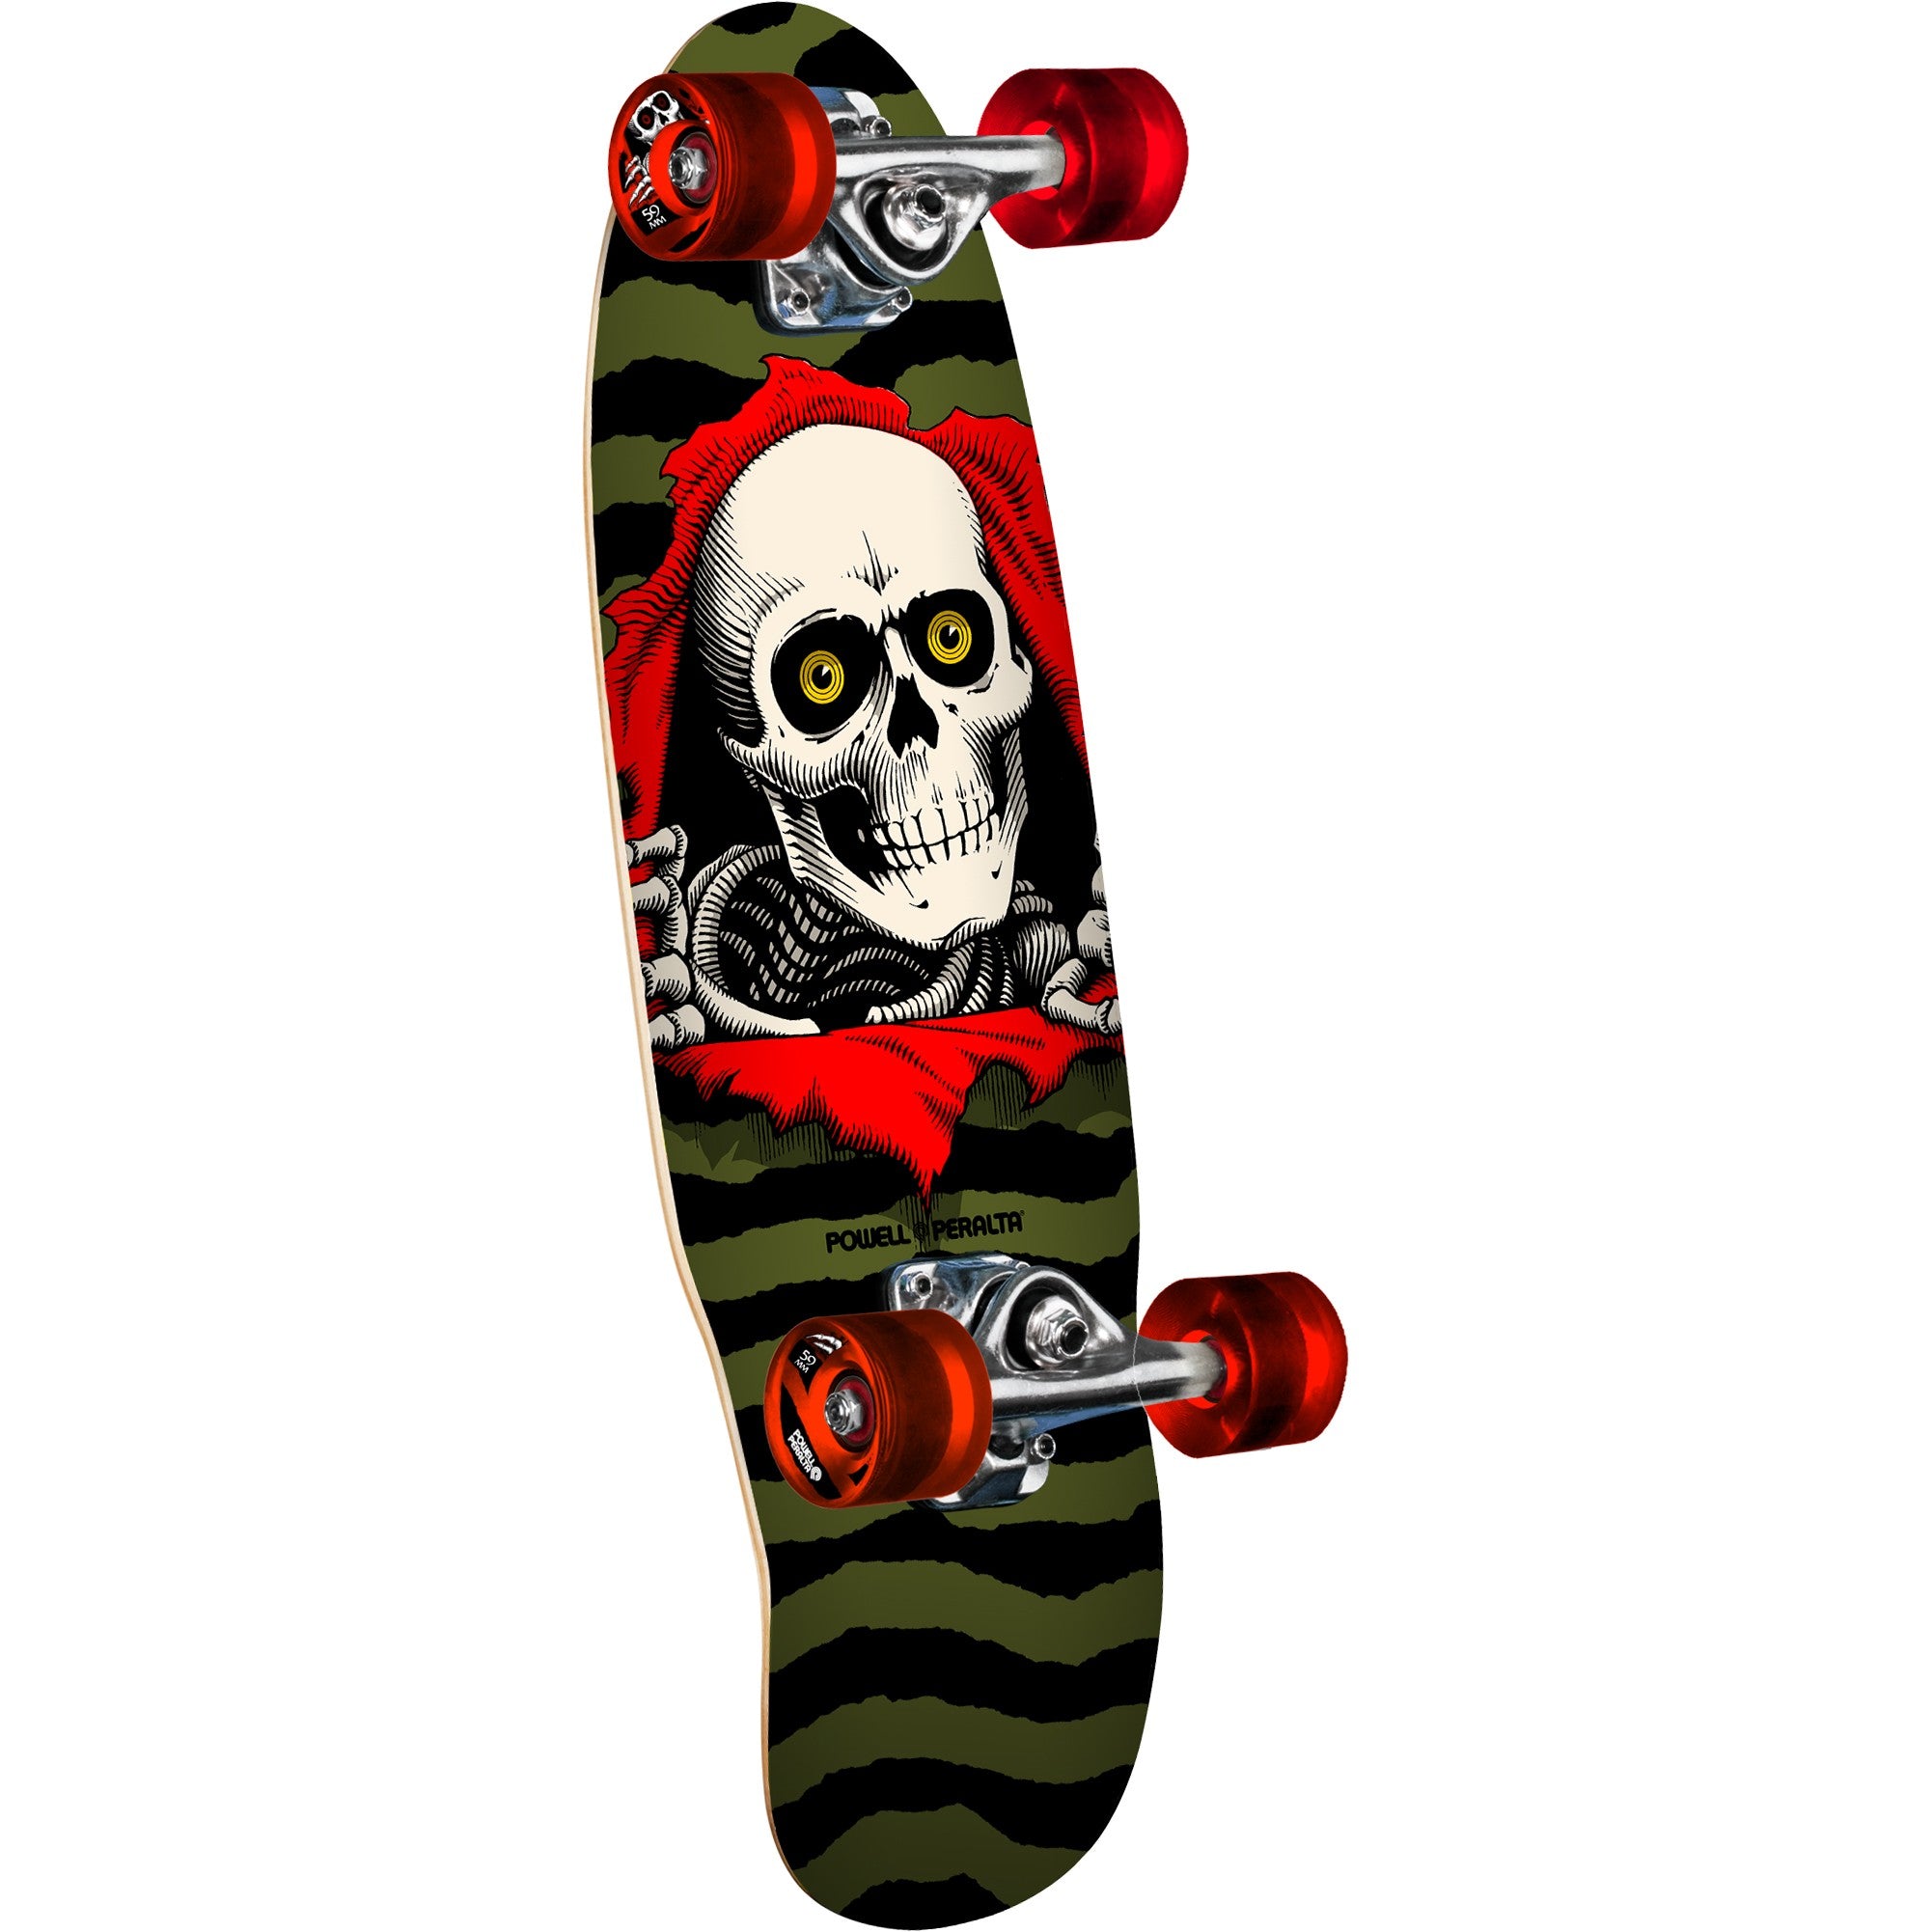 Powell Peralta - Complete 7.5 x 24.0 Cruiser Ripper - Olive